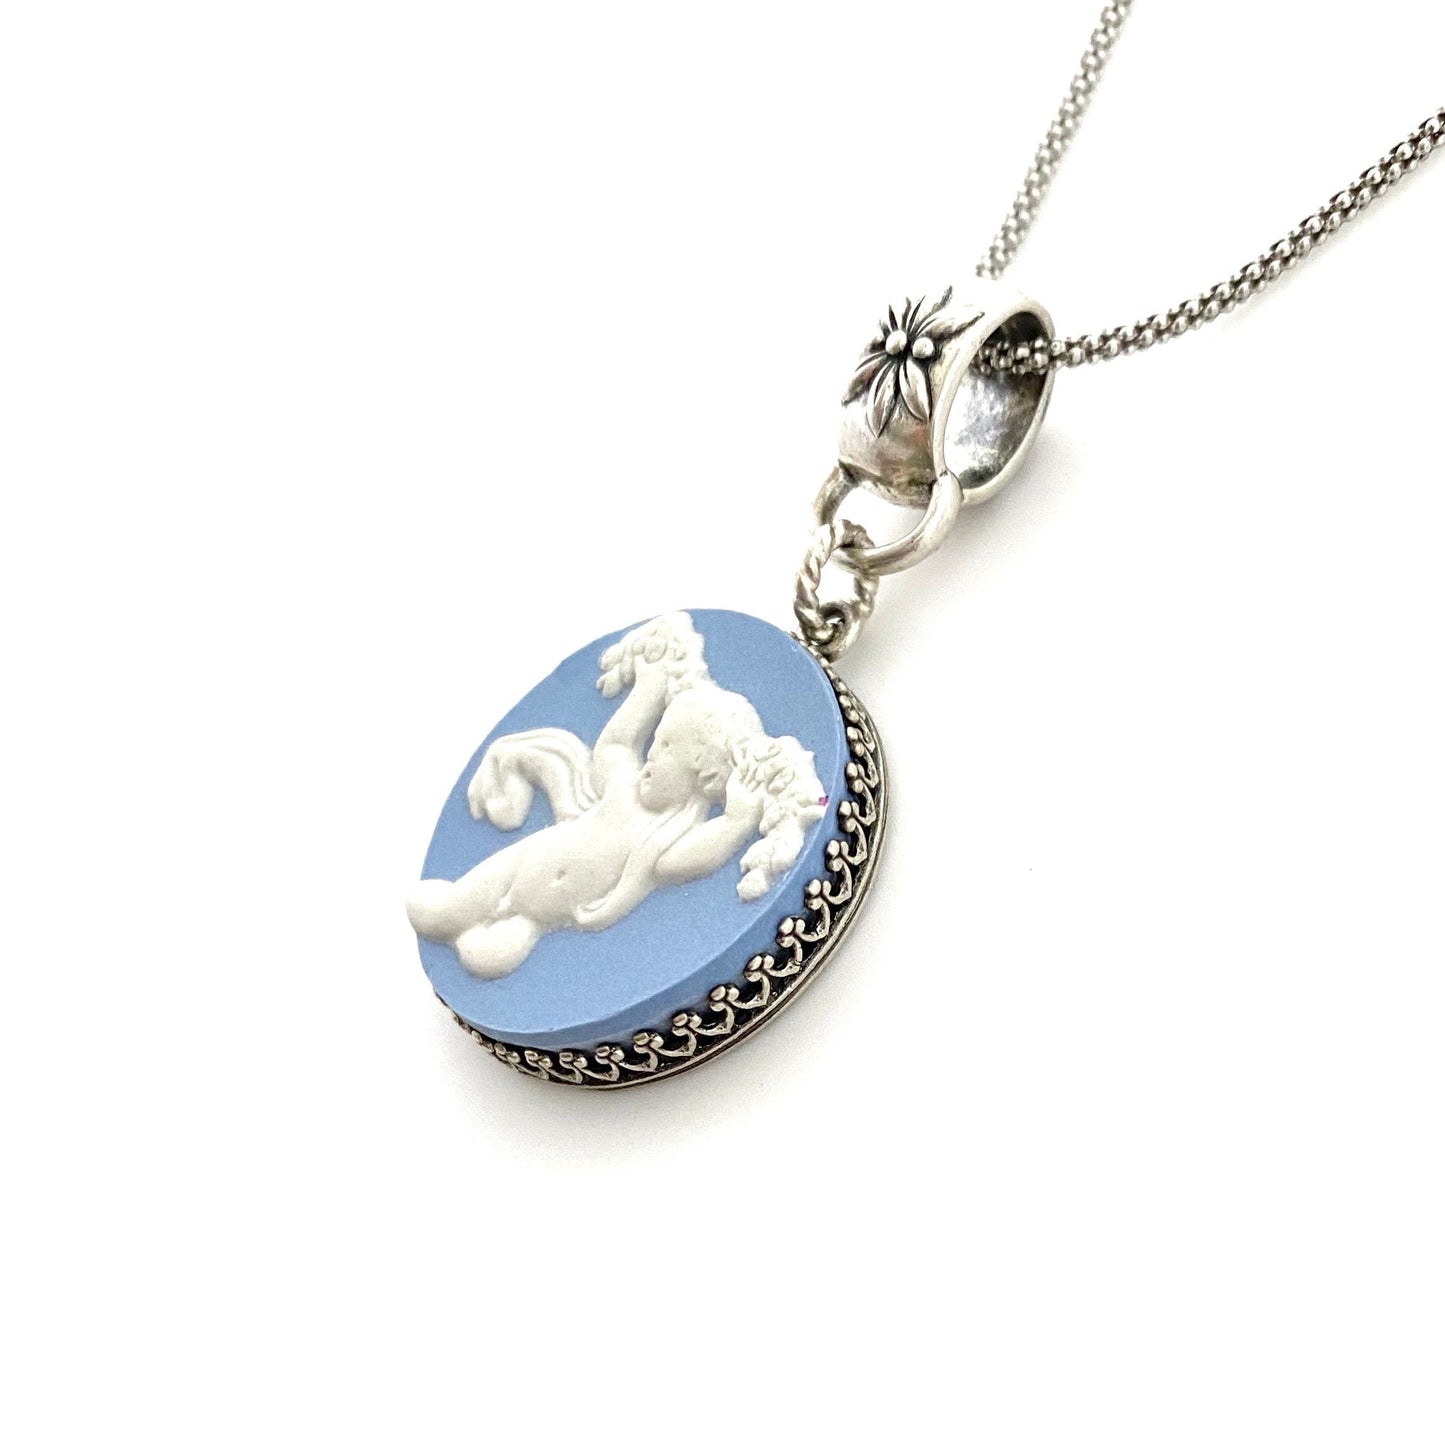 Wedgwood Jasperware, Angel Cameo Necklace, Victorian Broken China Jewelry, Anniversary Gifts for Wife,  Gifts